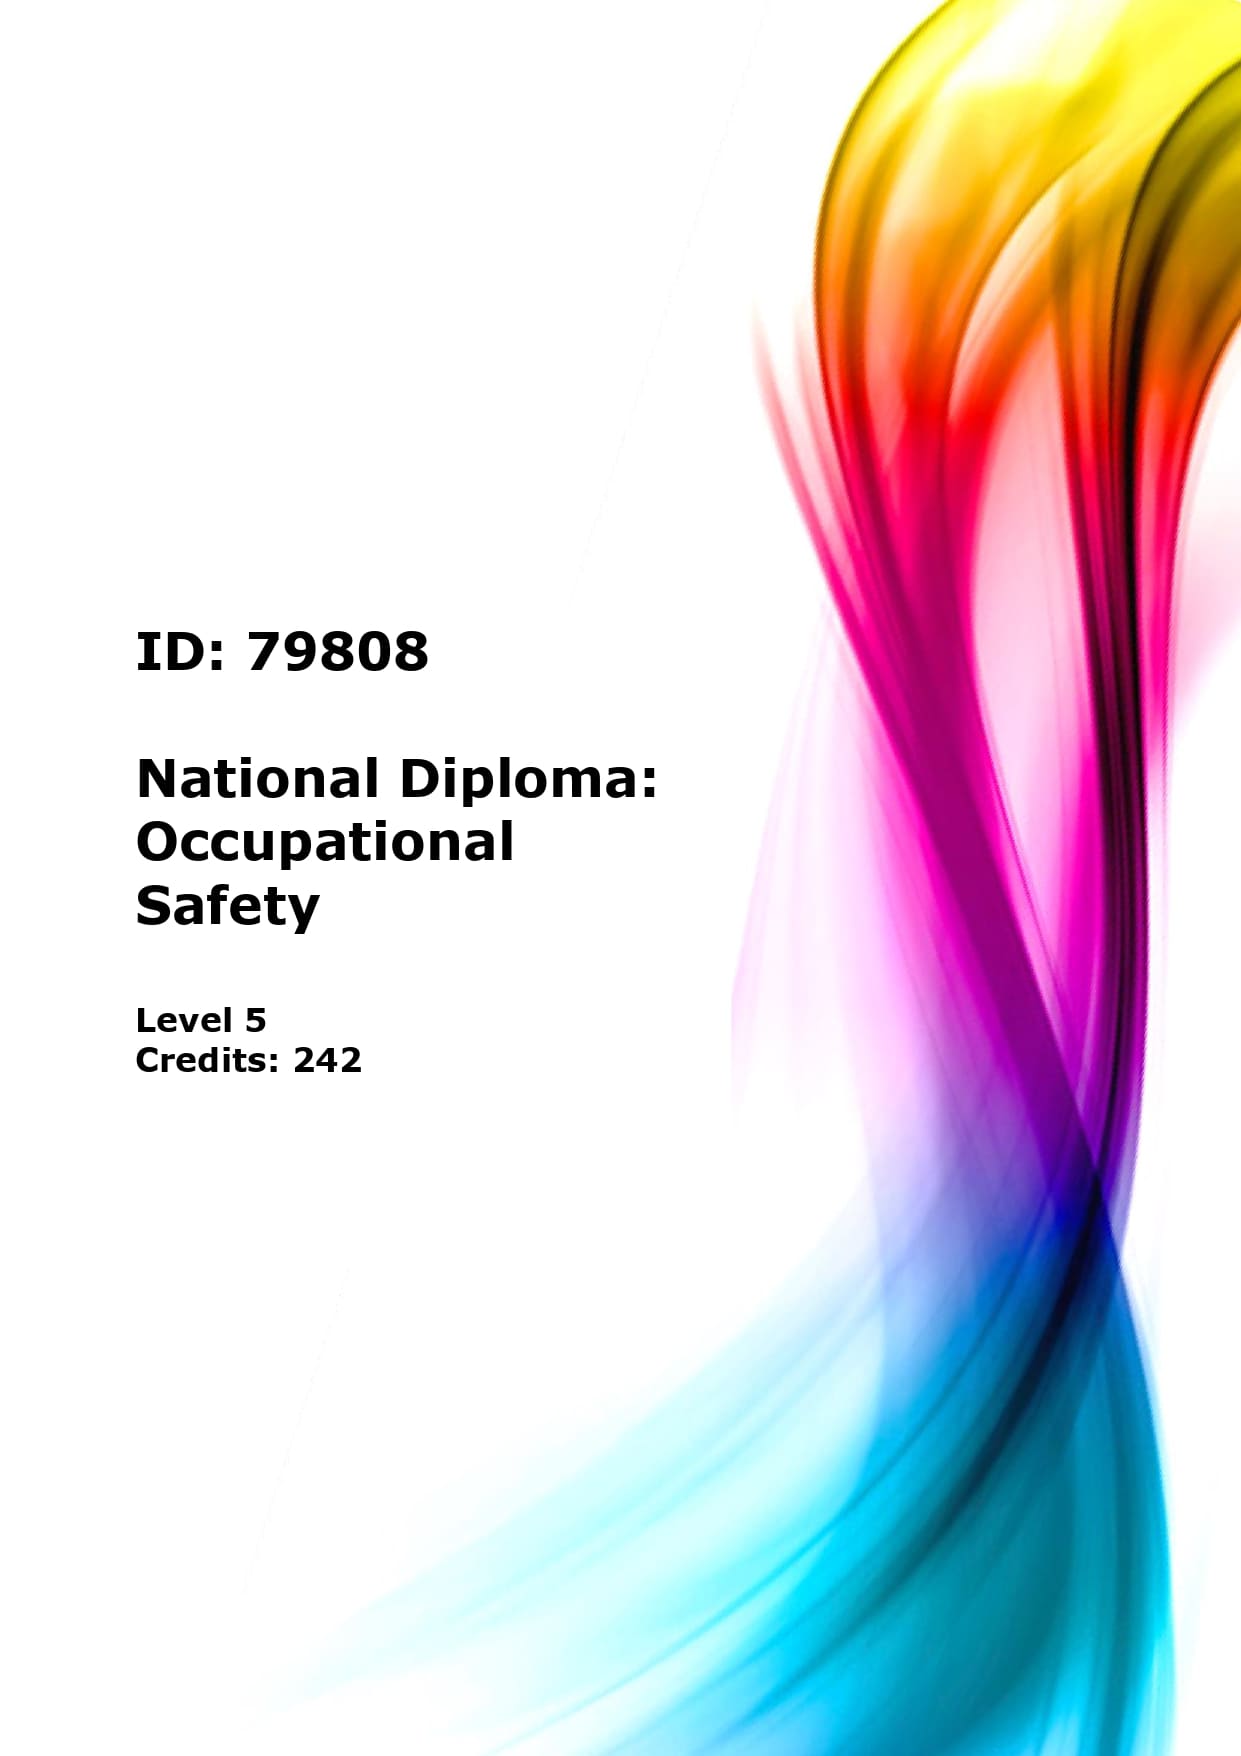 National Diploma: Occupational Safety